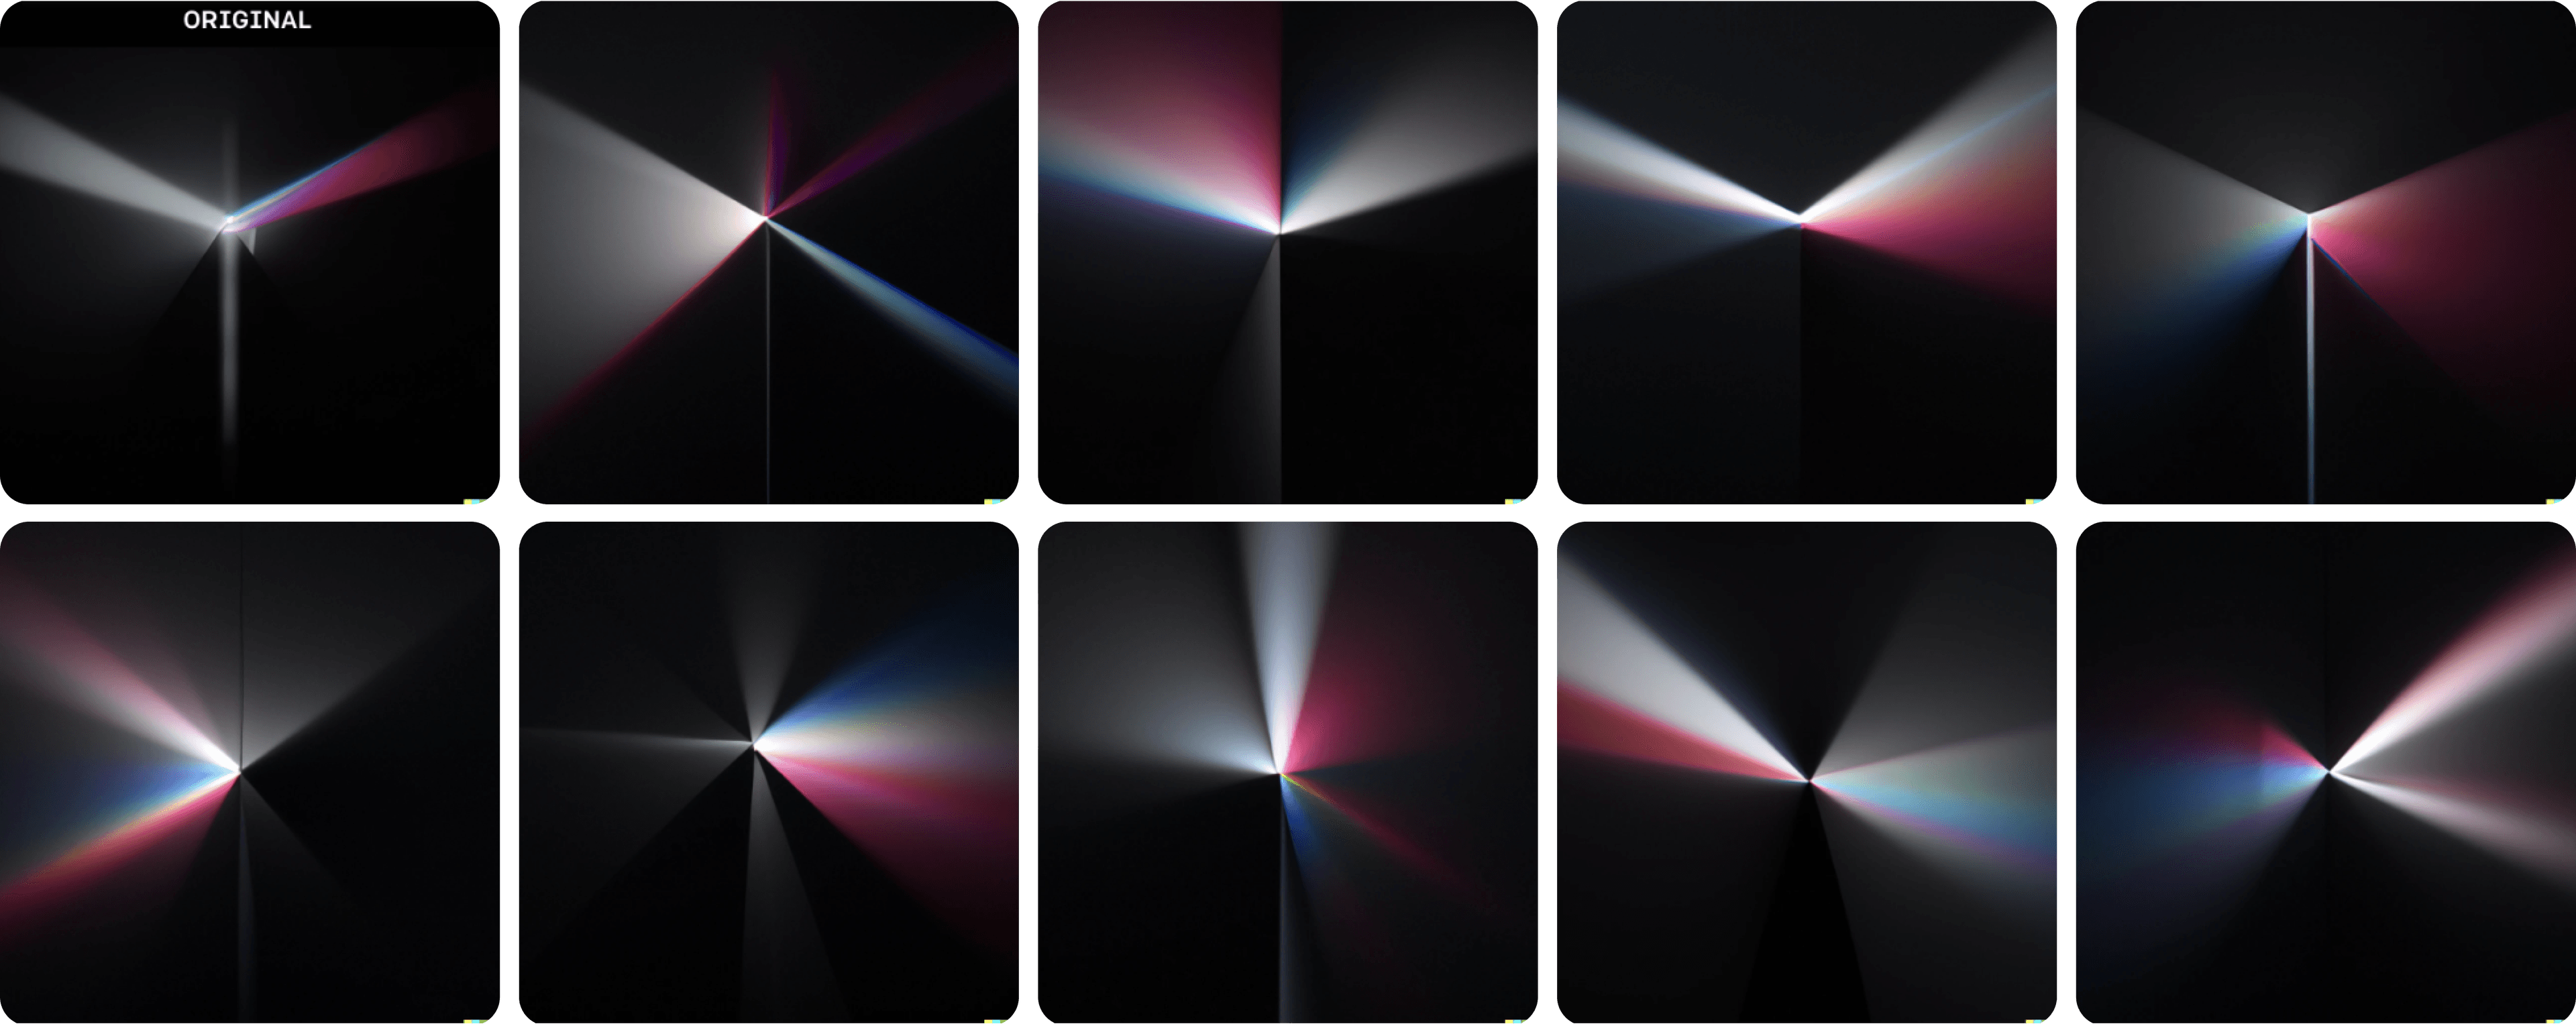 10 permutations of an image generated by DALL-E. The original image also came from DALL-E.